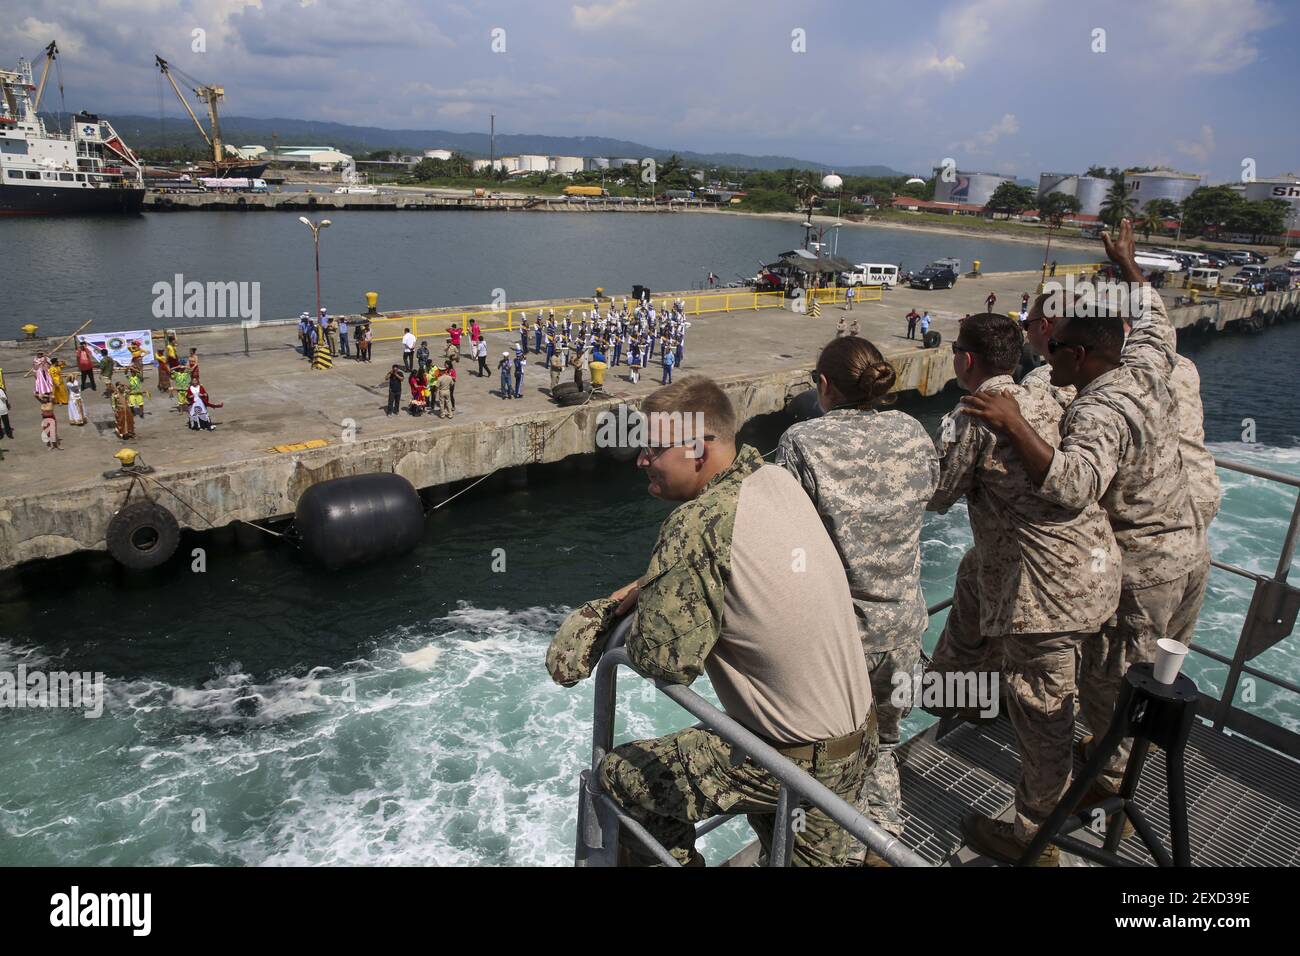 SAN FERNANDO CITY, Philippines (Aug. 4, 2015) Service members with Pacific Partnership 2015 wave to locals from aboard the Military Sealift Command joint high speed vessel USNS Millinocket (JHSV 3). The service members are assigned to Task Force Forager and will be in the Philippines until Aug. 15 providing medical and engineering assistance. (Photo by combat correspondent Sgt. James Gulliver/U.S. Marine Corps) *** Please Use Credit from Credit Field *** Stock Photo